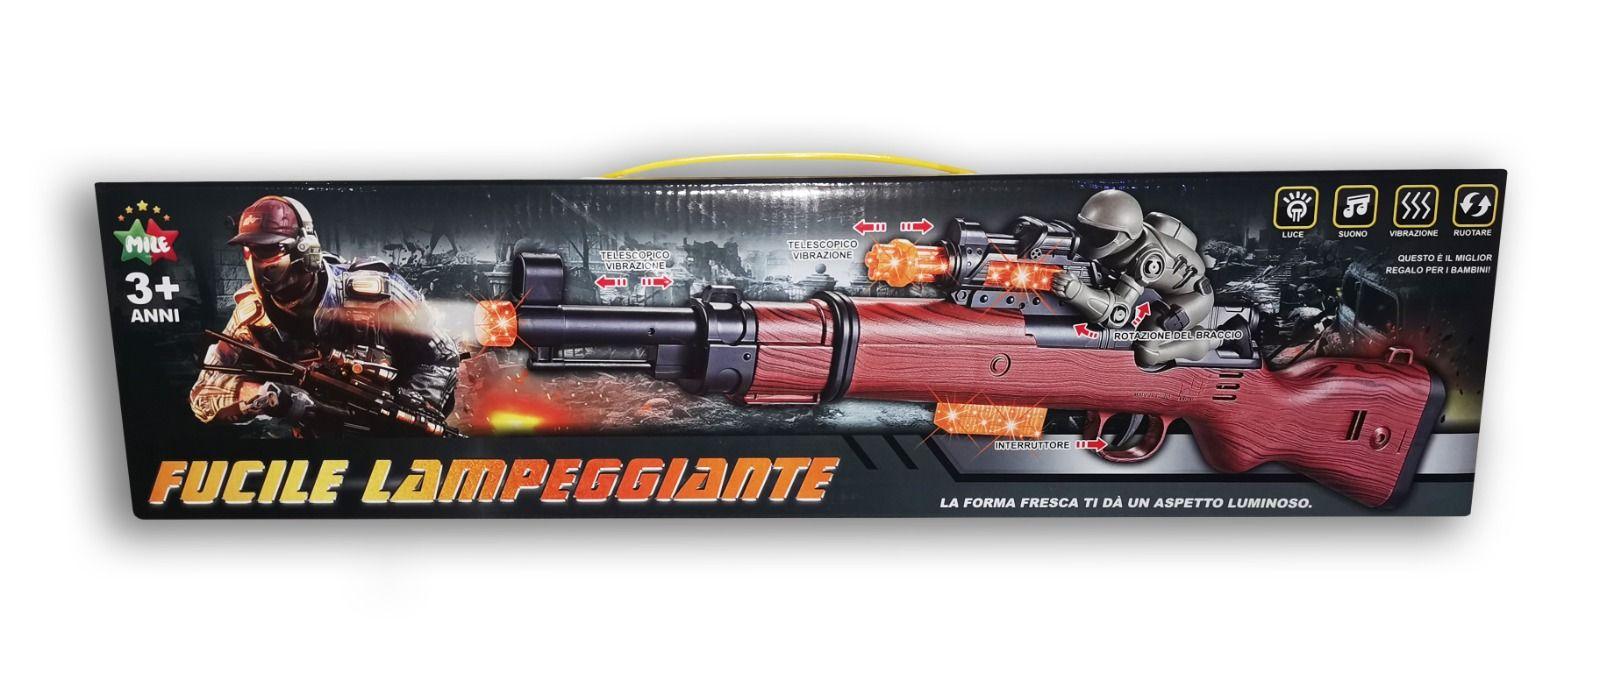 Toy rifle for children with light and sound effects